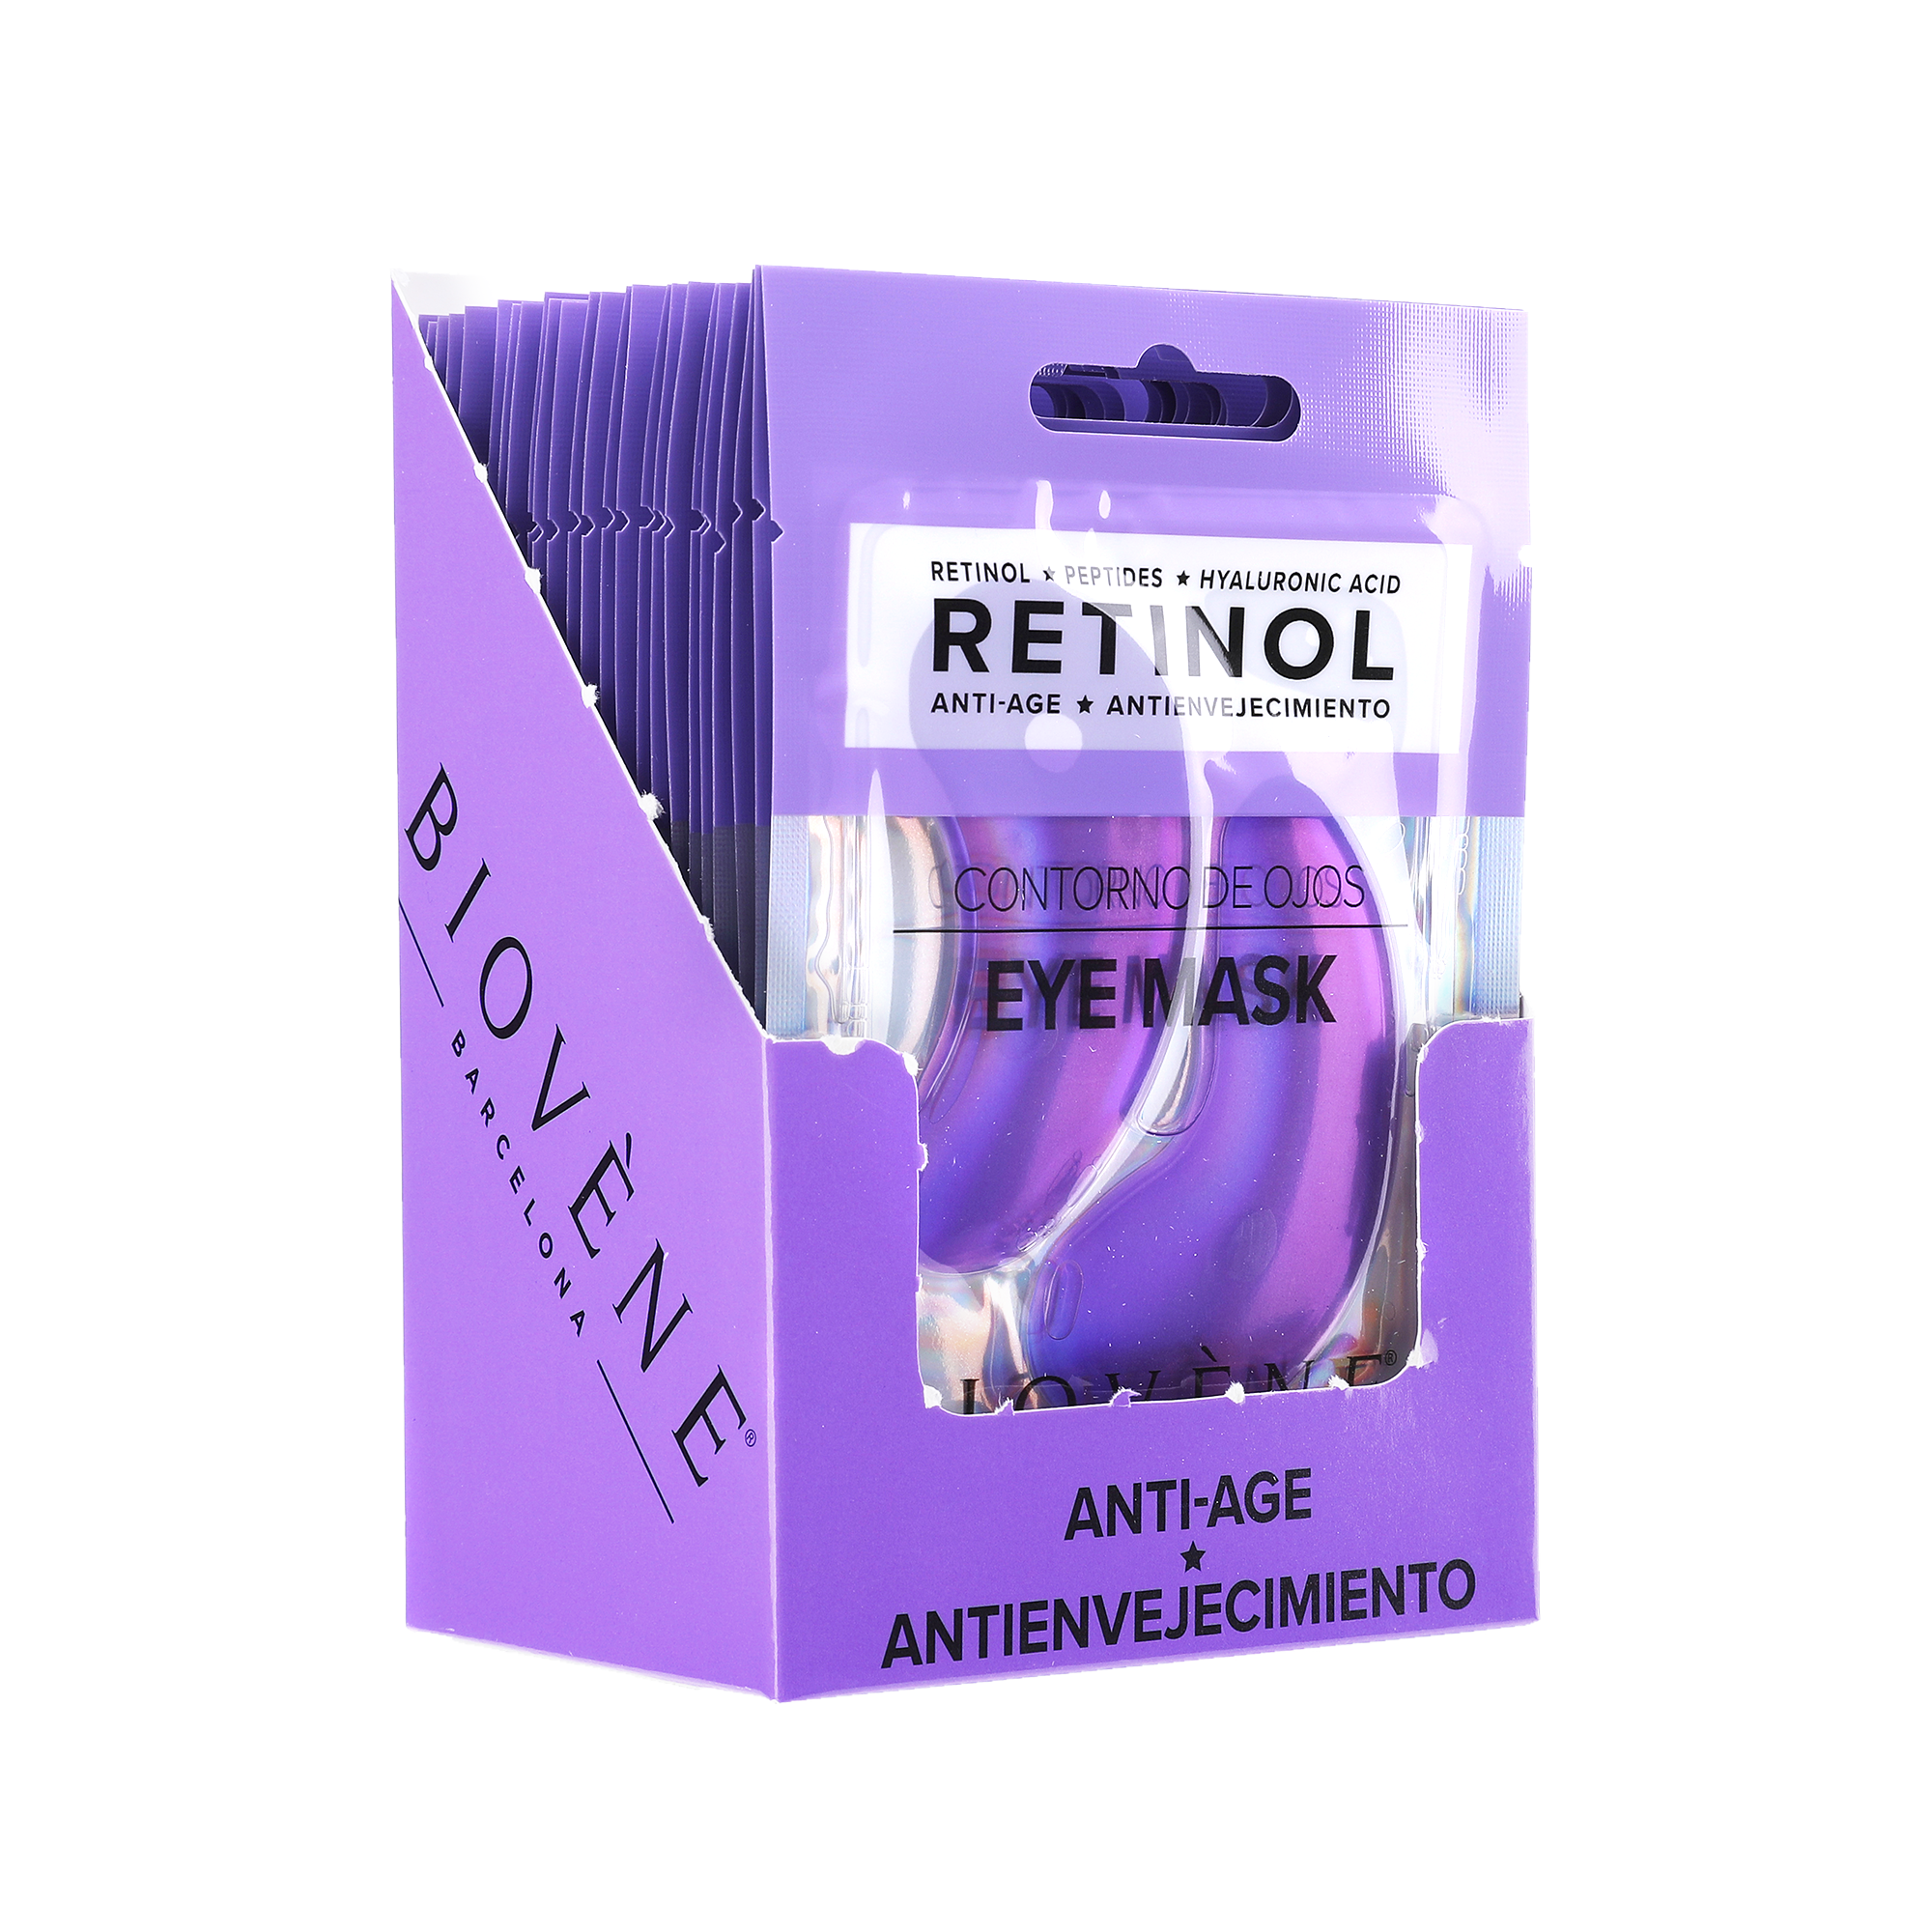 RETINOL Signs-of-Aging Eye Pad Mask with Peptides and Hyaluronic Acid